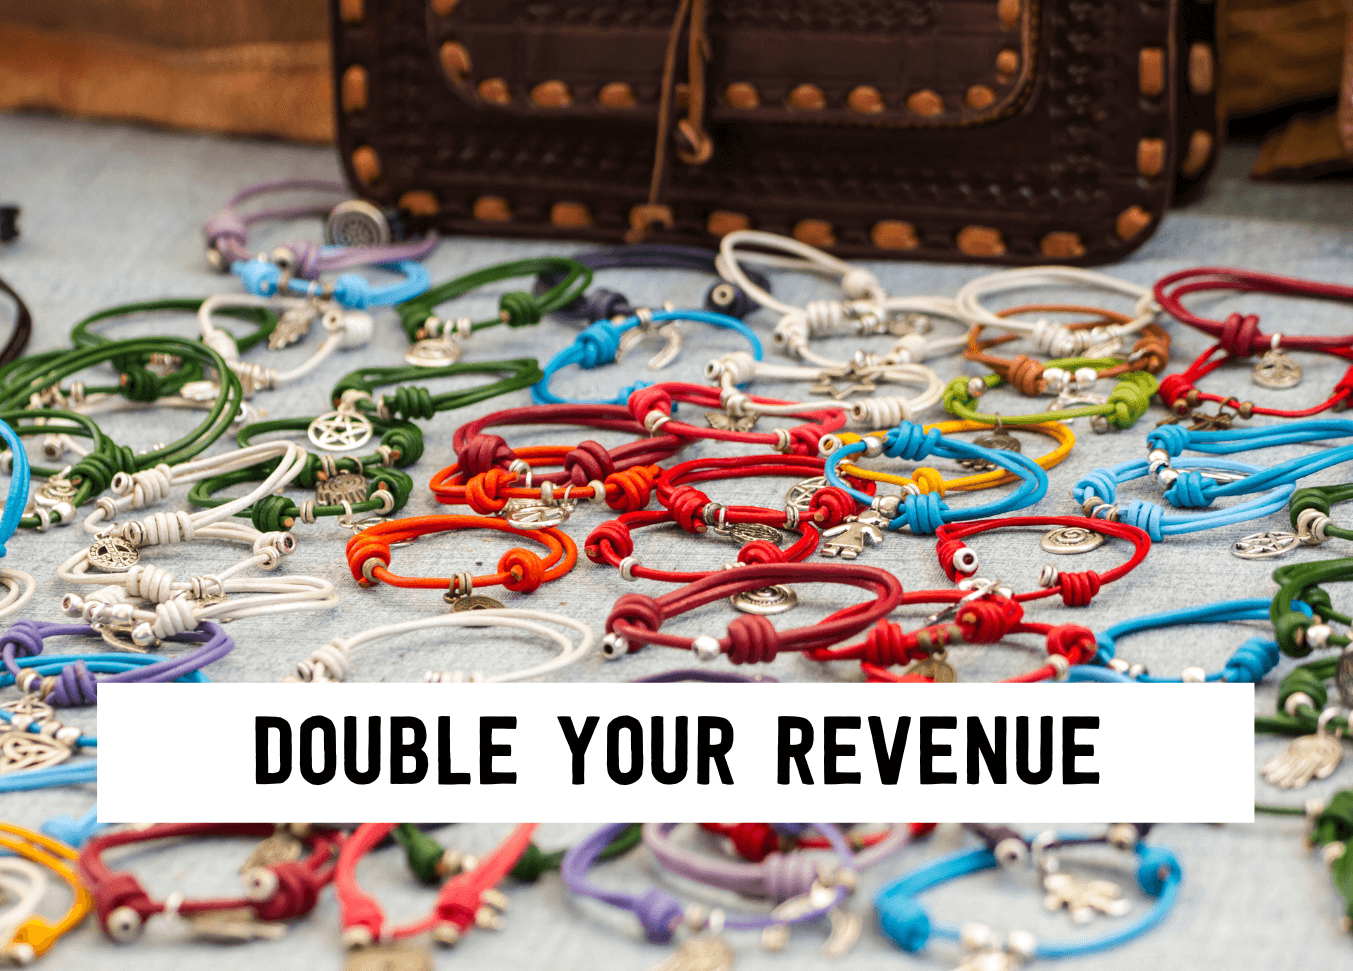 Double your revenue | Tizzit.co - start and grow a successful handmade business